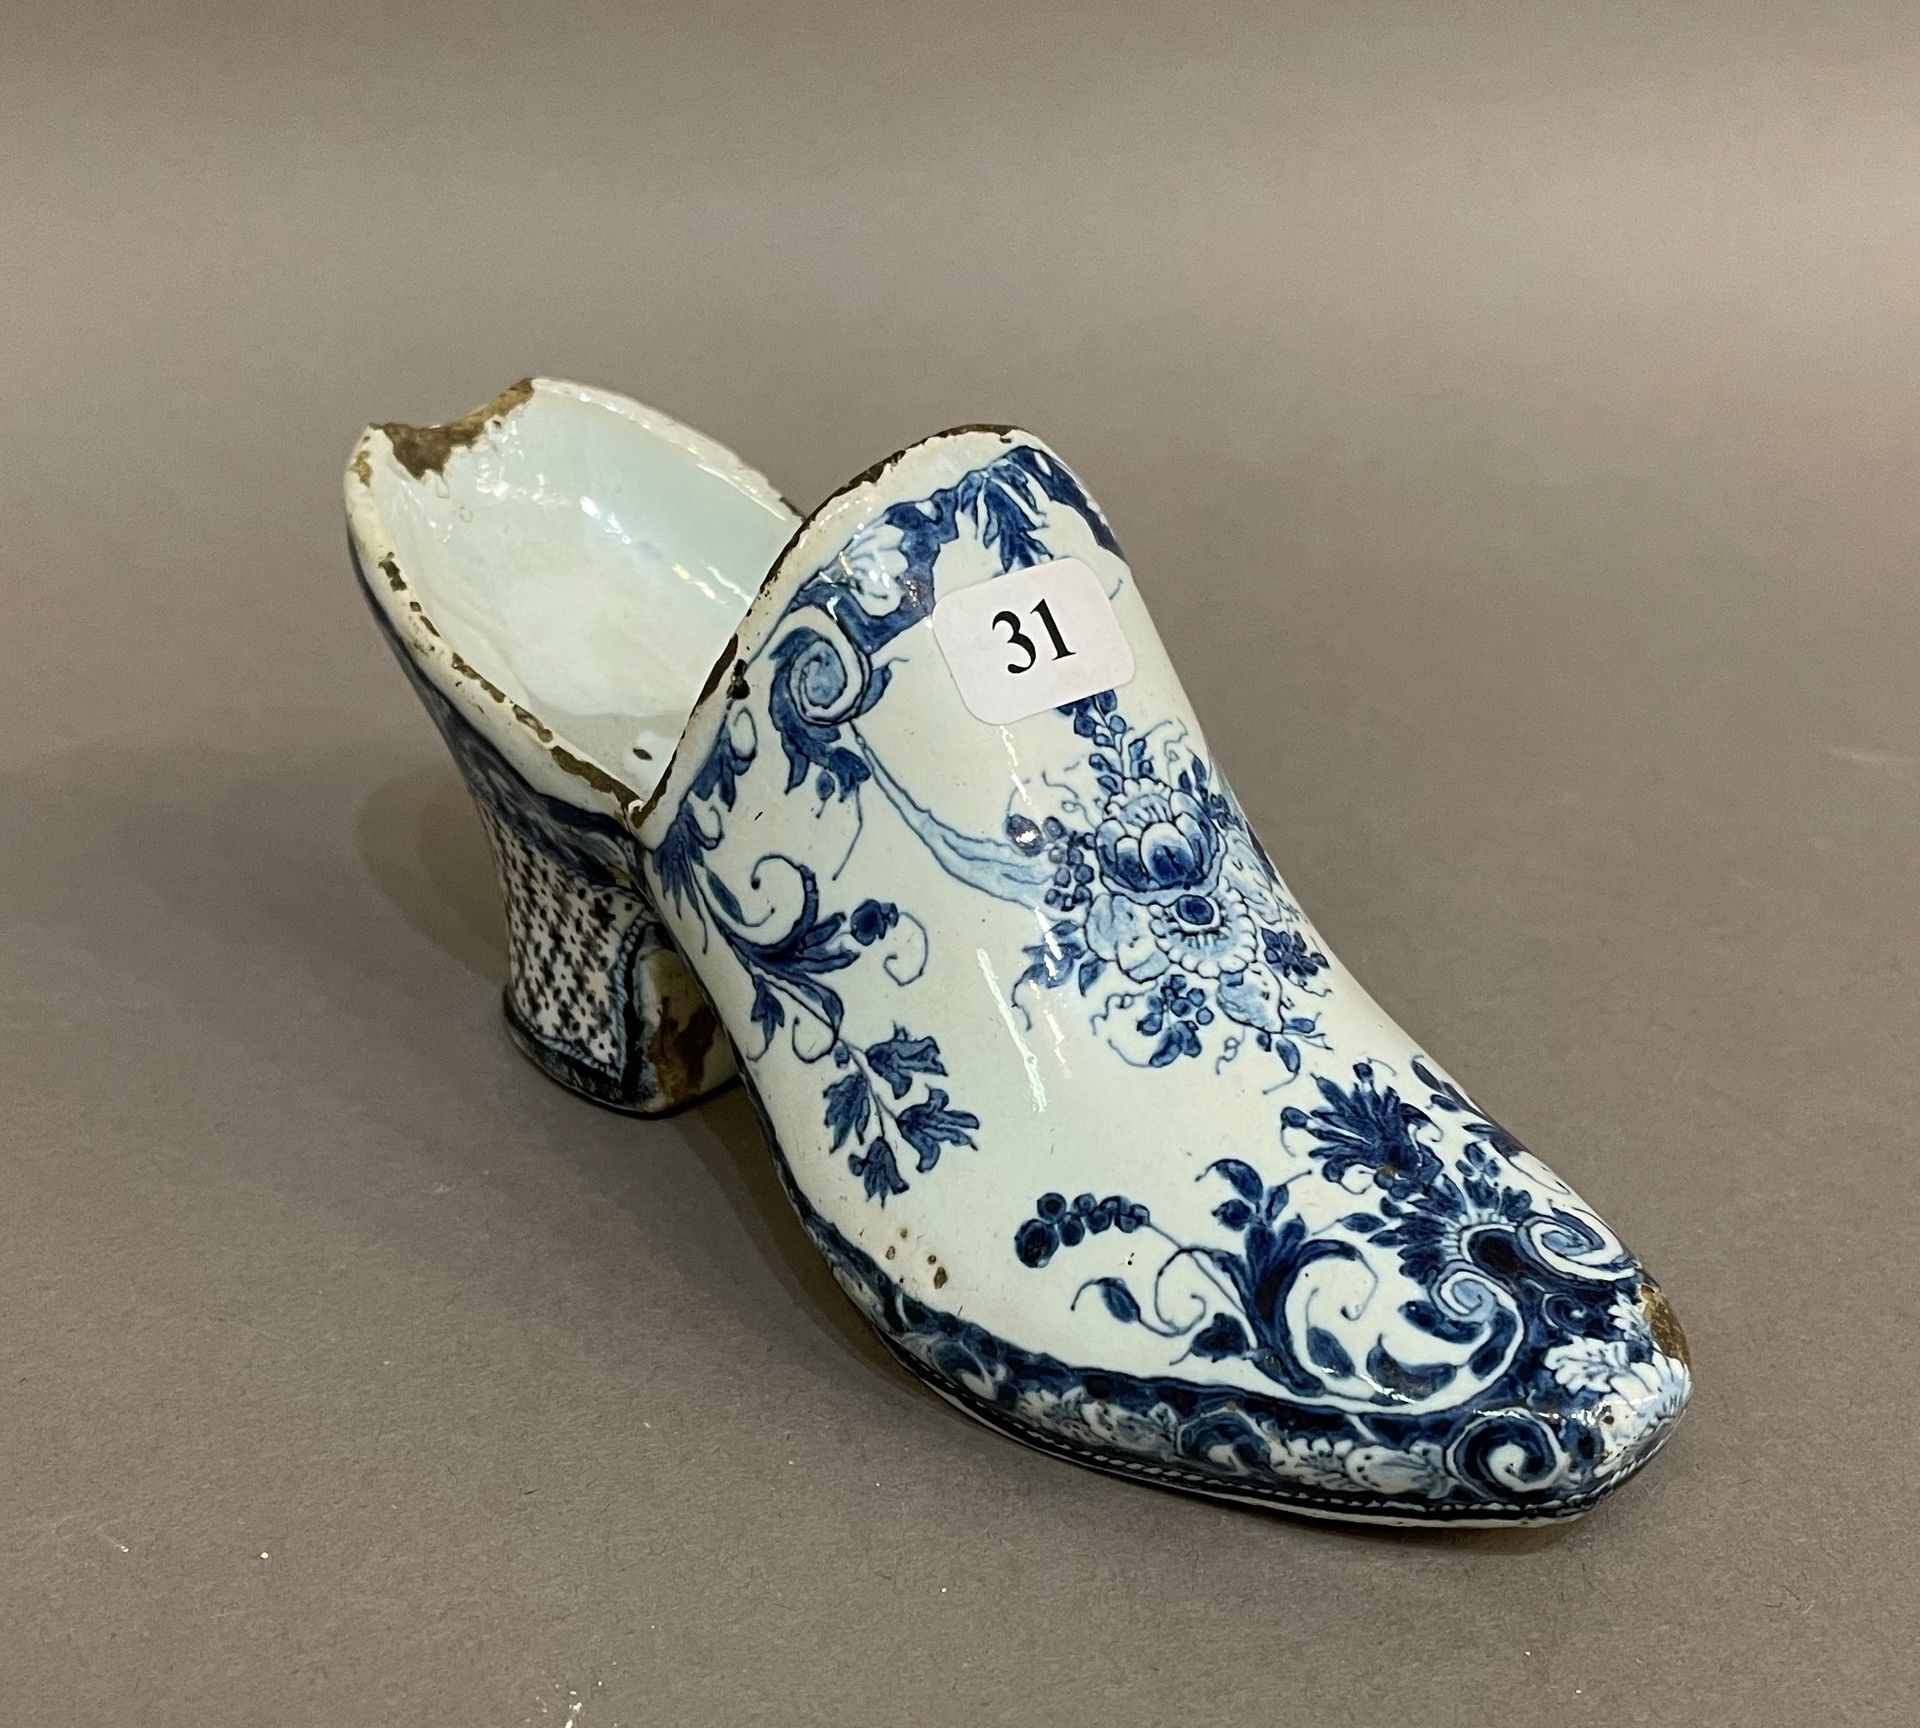 Null Rouen

Earthenware shoe decorated in blue monochrome with garlands of flowe&hellip;